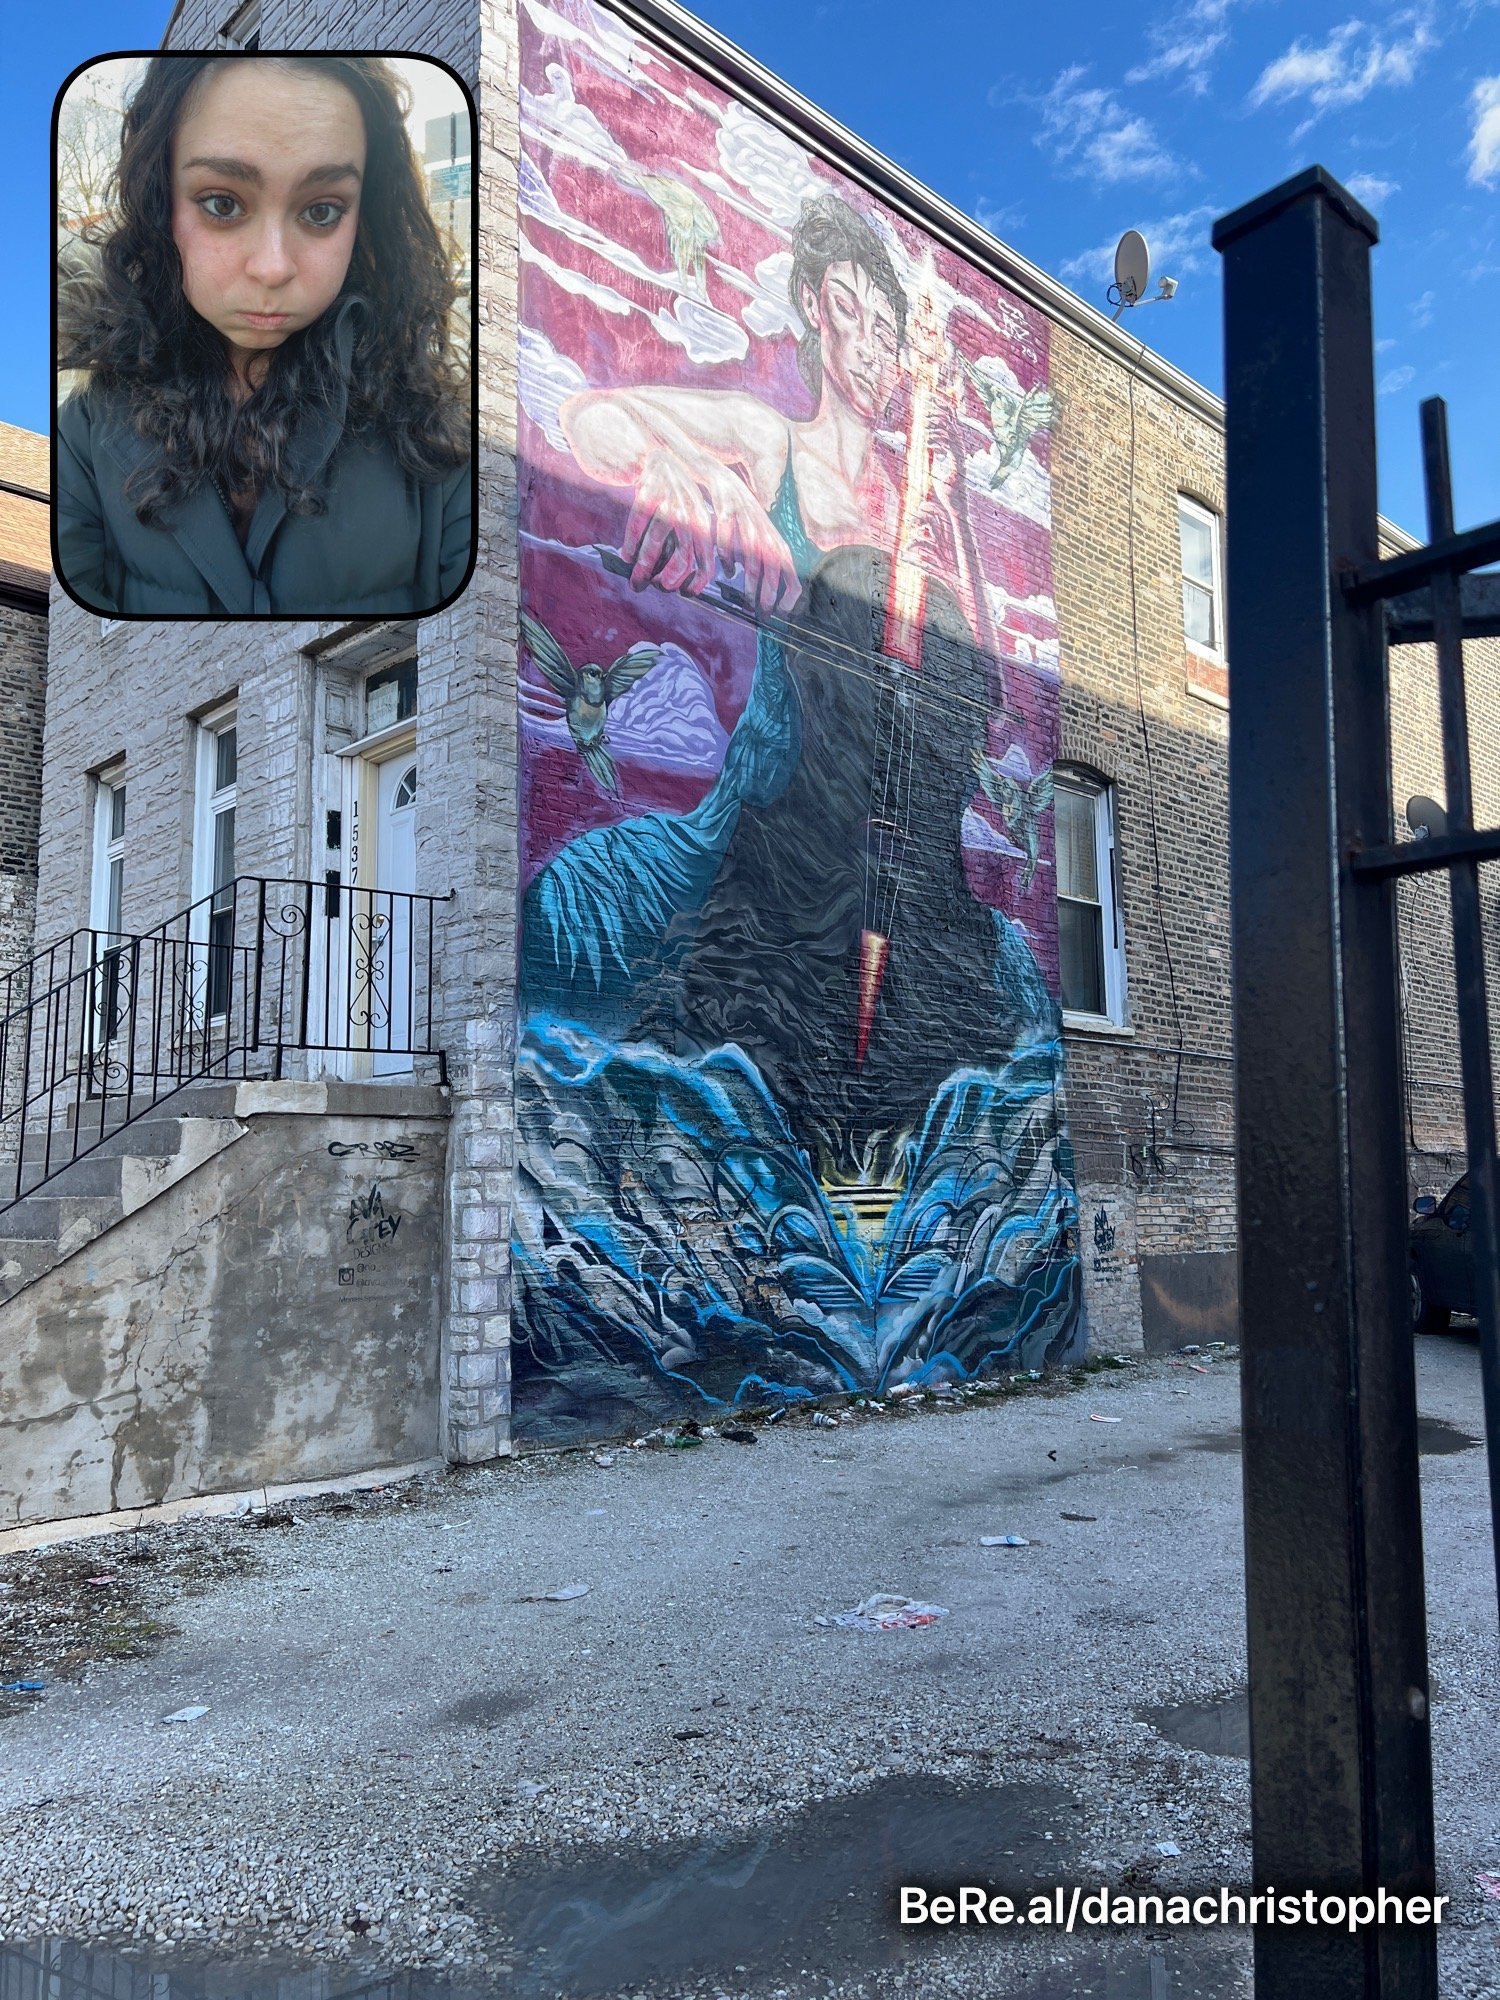   Amazing mural that I saw in Pilsen  